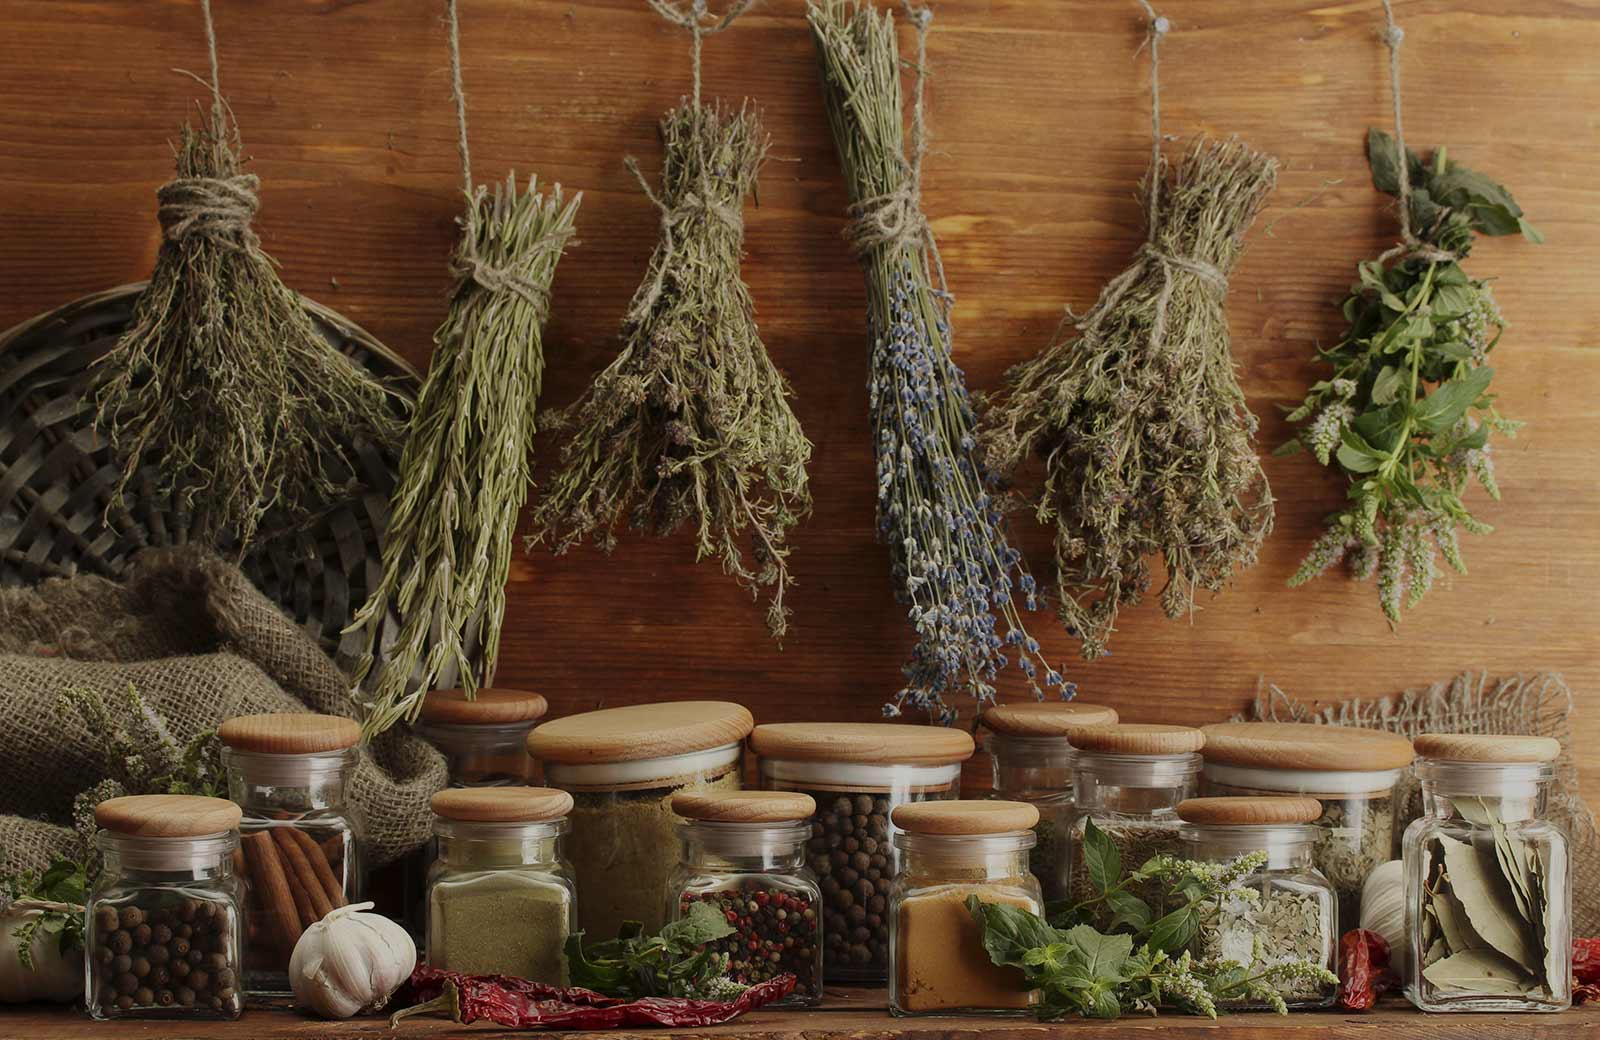 Herb and spice food chemistry